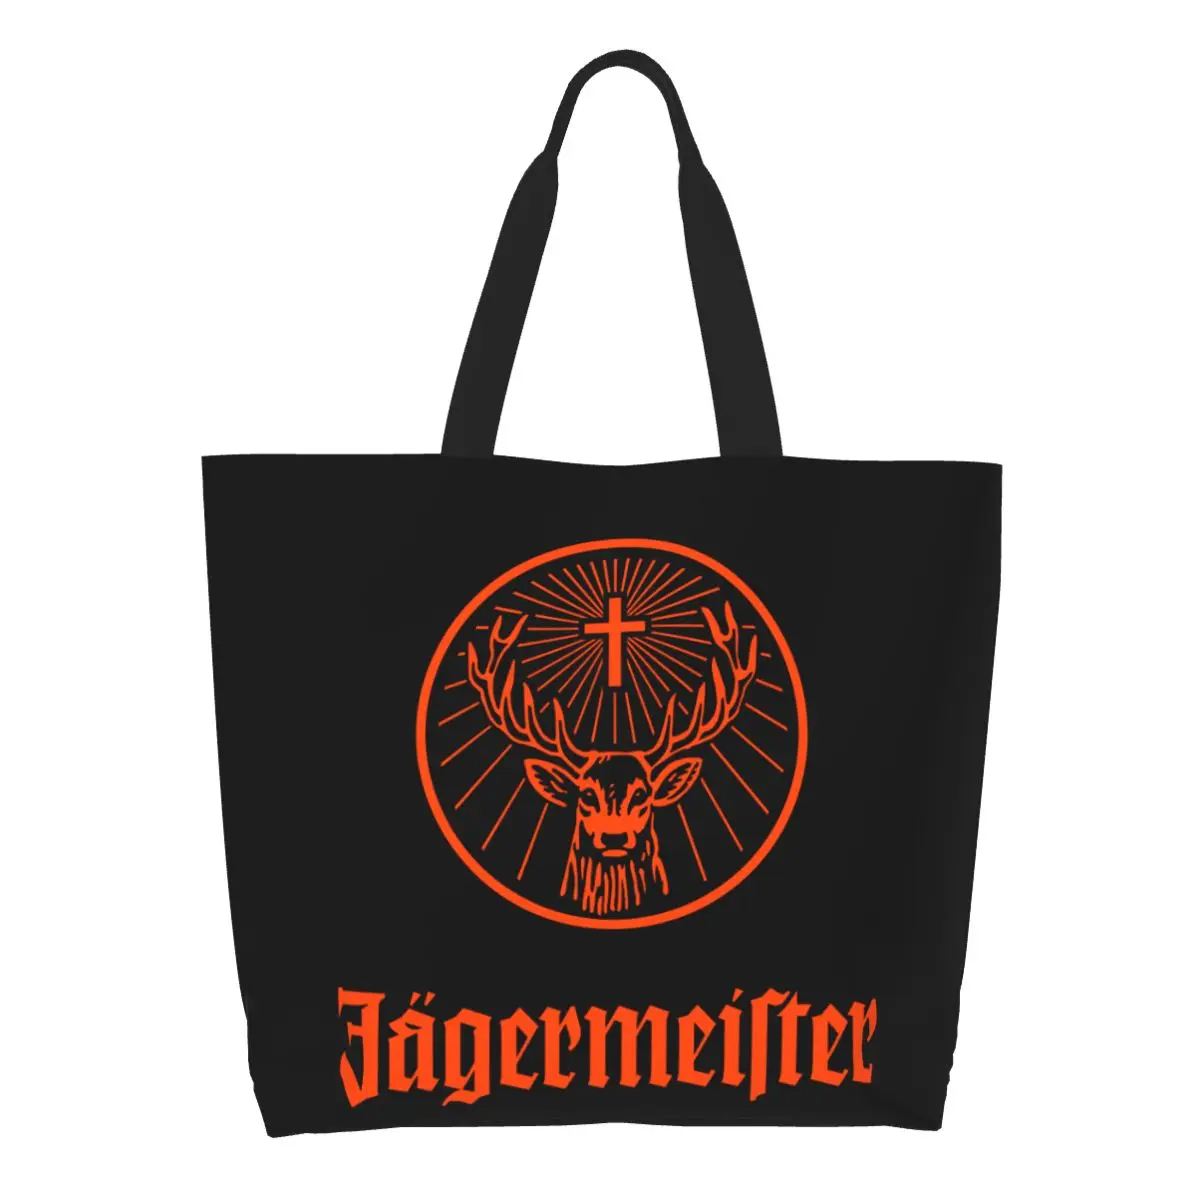 

Recycling Jagermeister Shopping Bag Women Shoulder Canvas Tote Bag Durable Groceries Shopper Bags